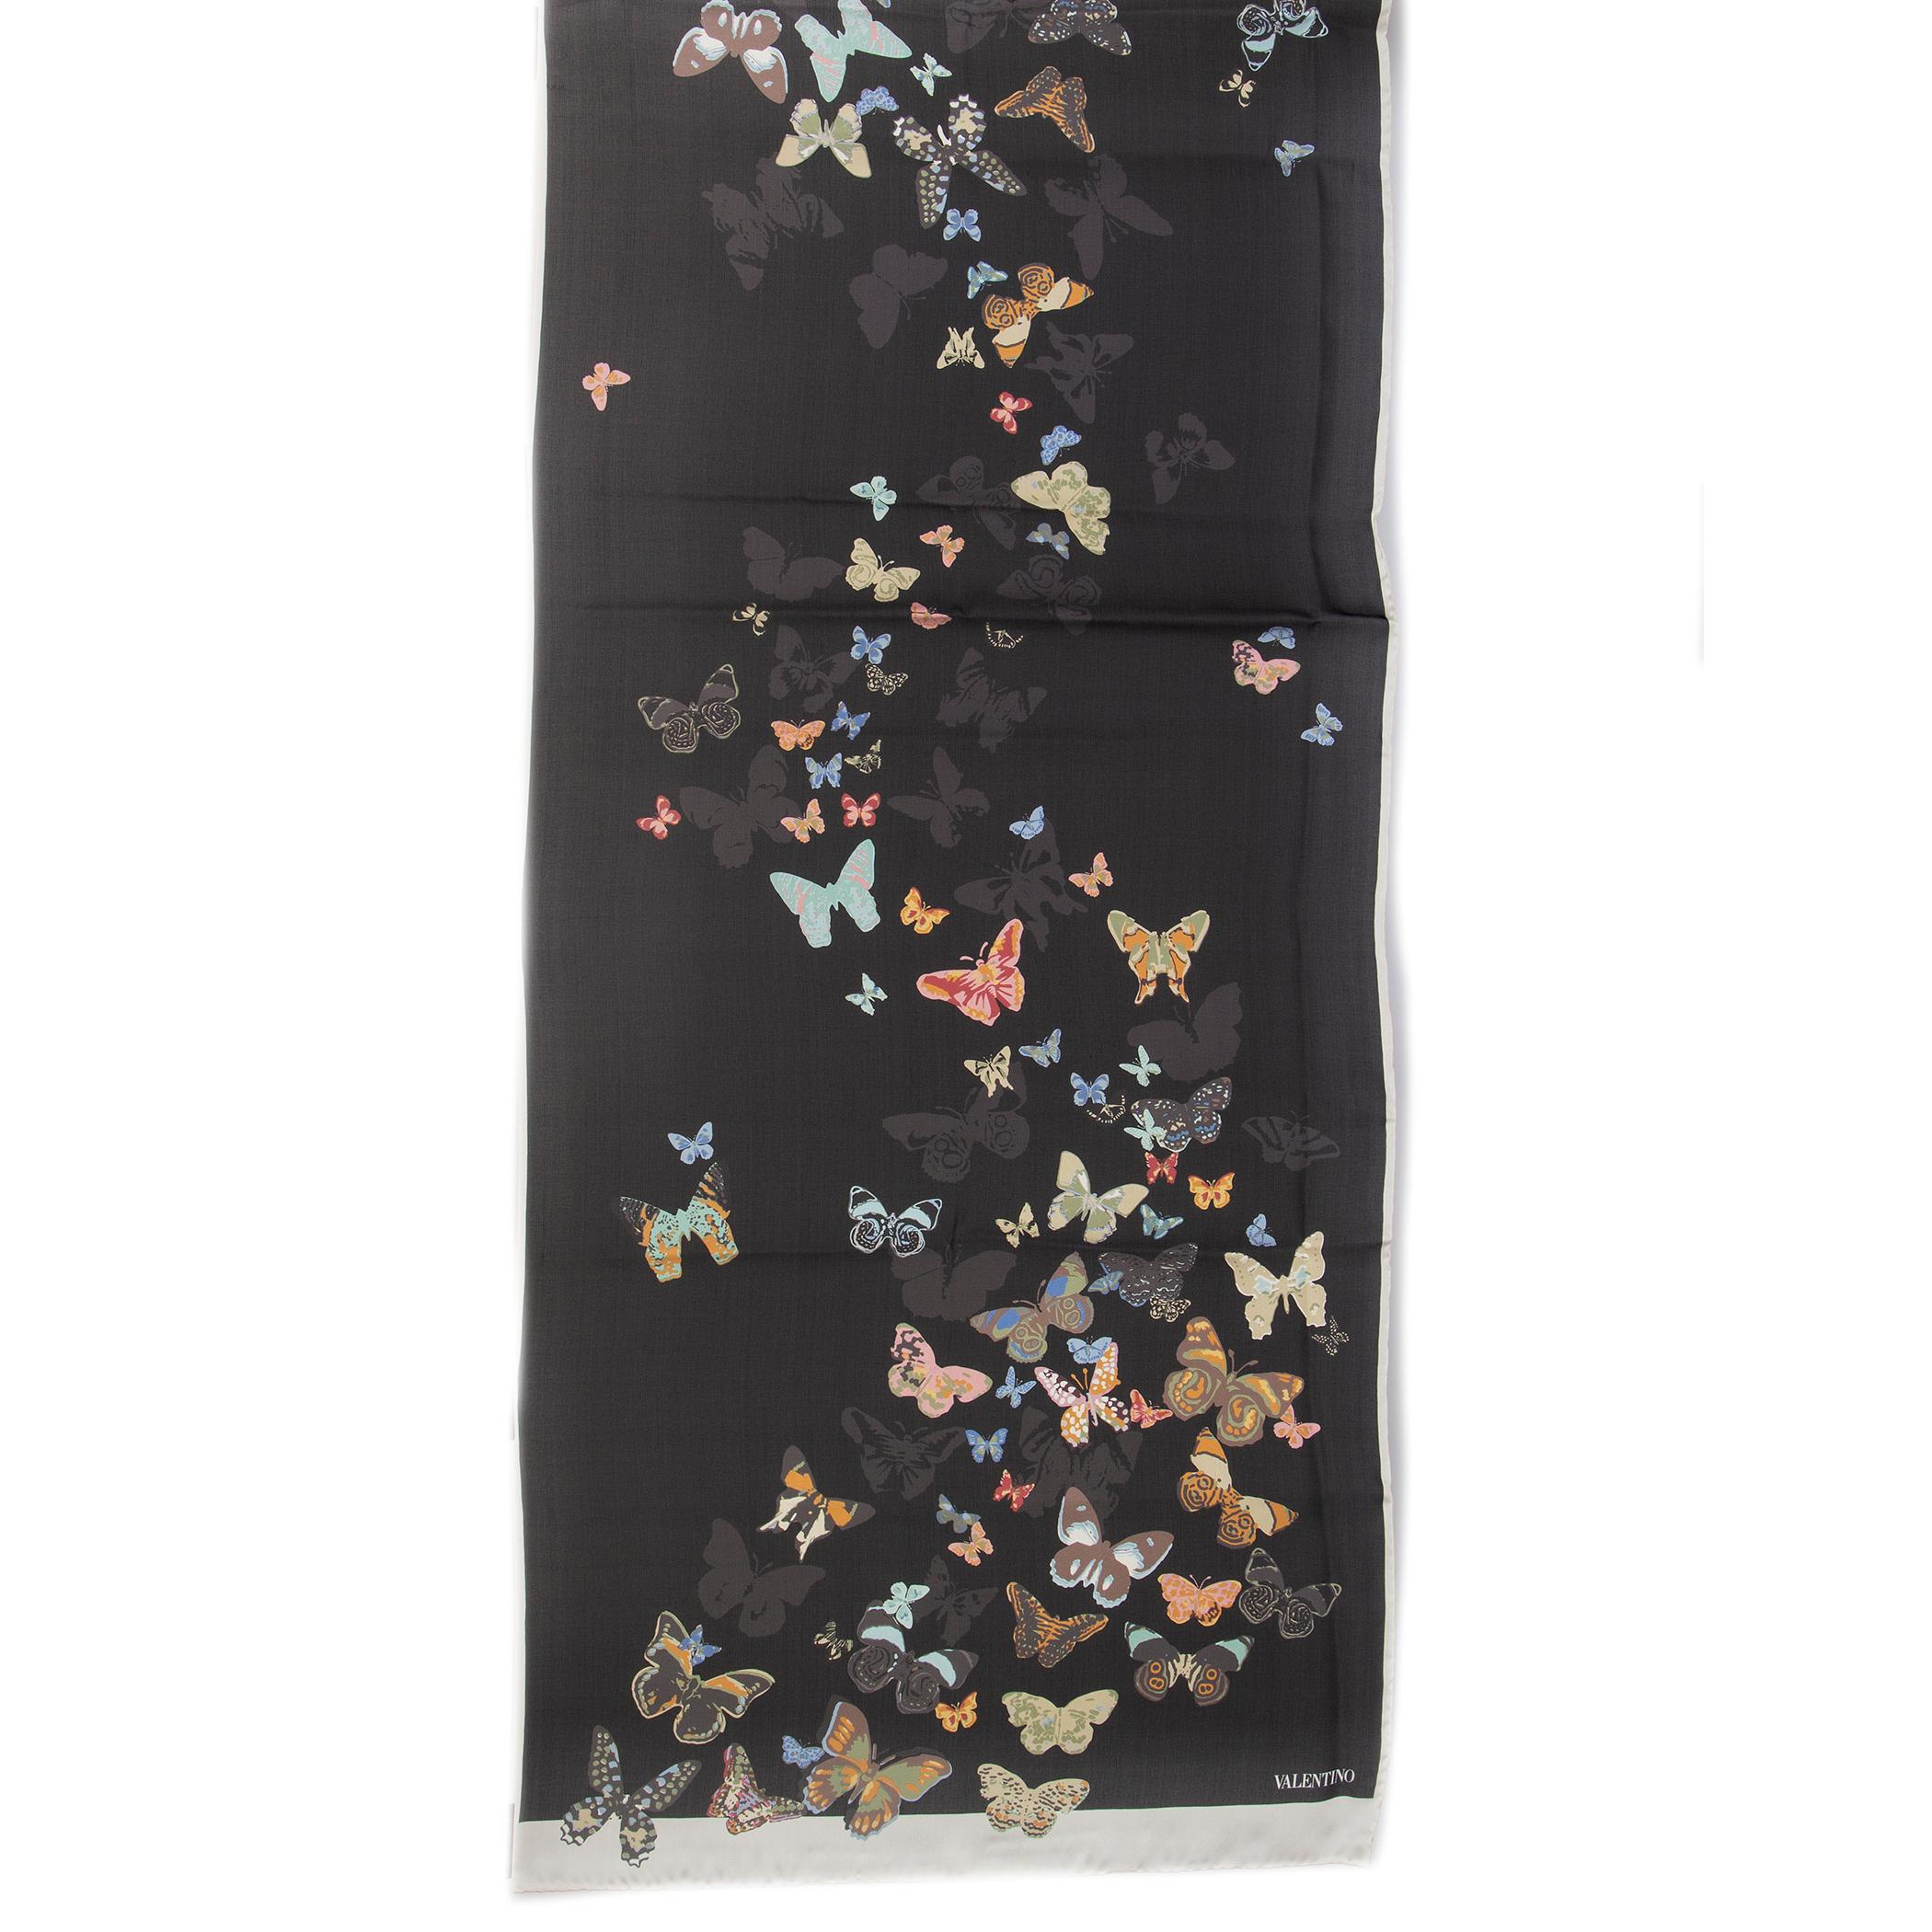 Valentino butterfly-print long scarf in off-white, black, sage, mustard, rose, baby blue, and shadow silk chiffon (100%). Has been worn and is in excellent condition. 

Width 70cm (27.3in)
Length 200cm (78in)